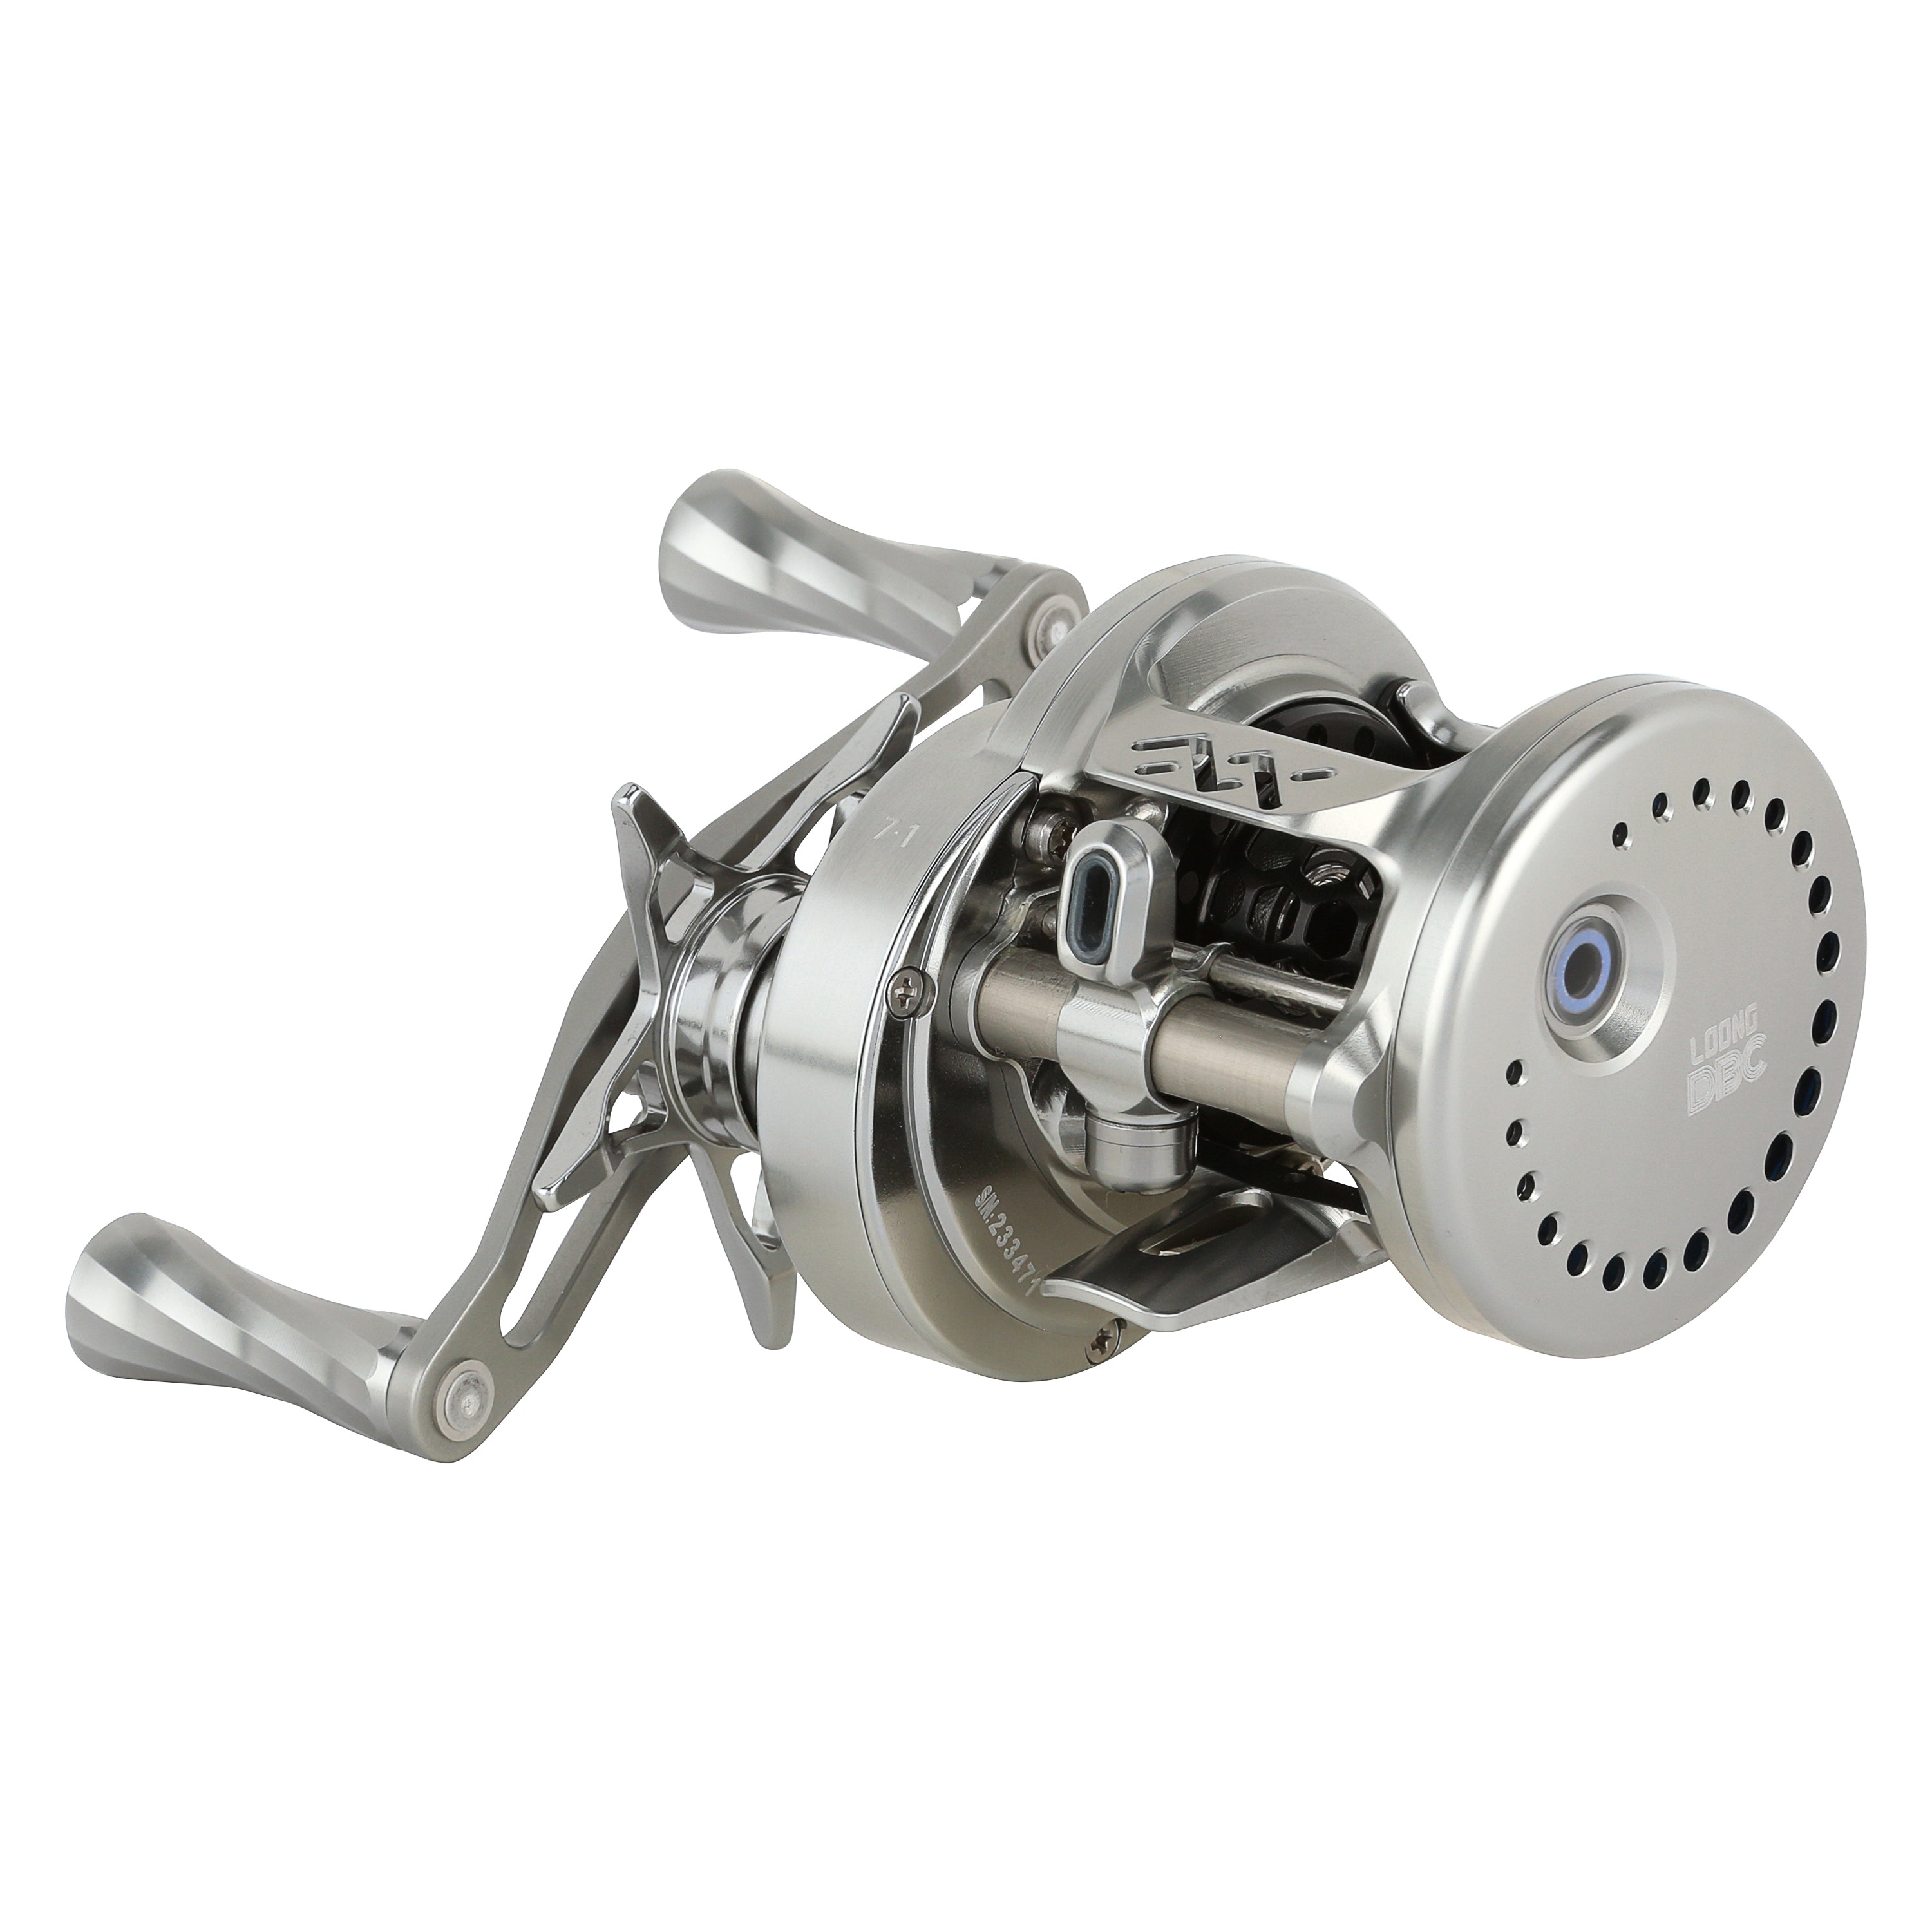 Loognze Roundcast DBC reel – Loongze USA